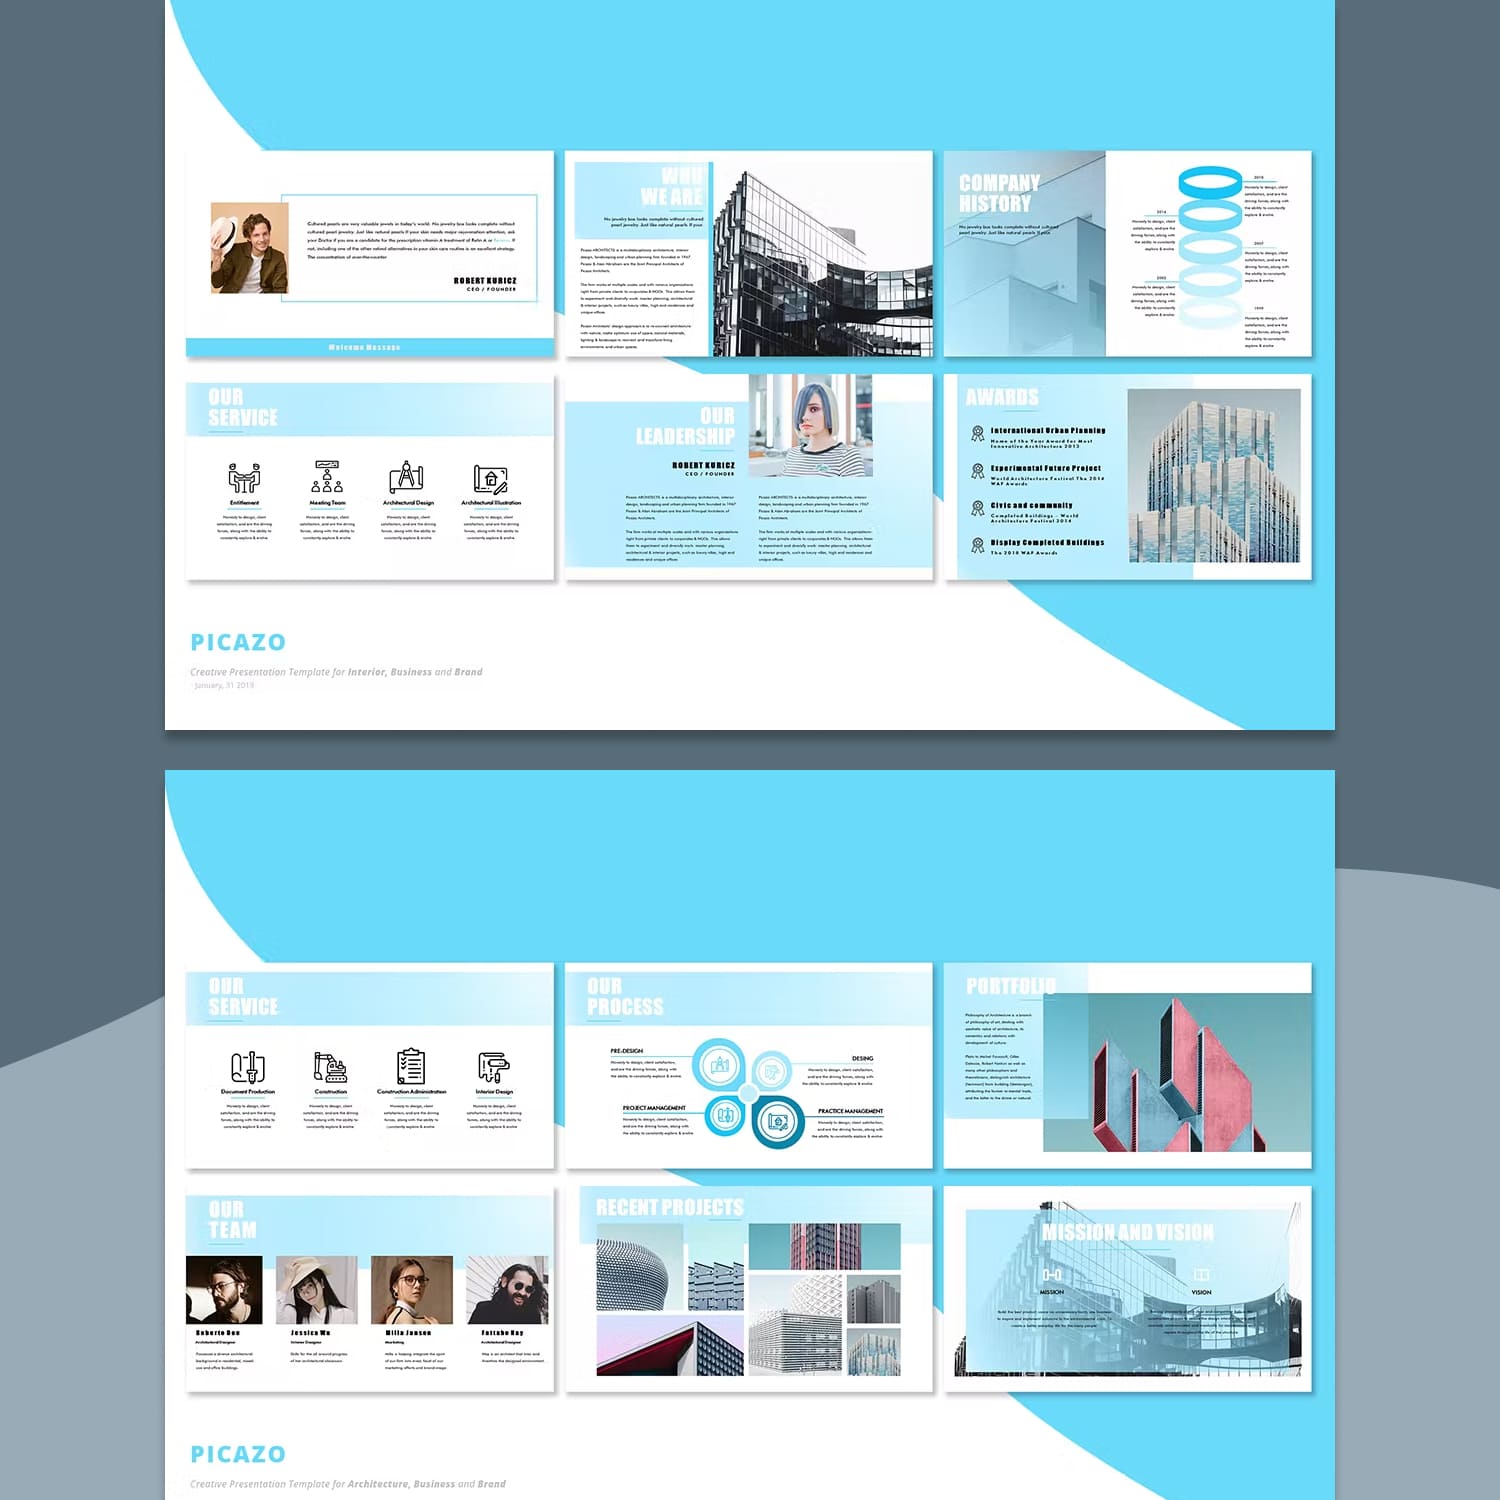 Picazo architecture powerpoint template created by Incools.